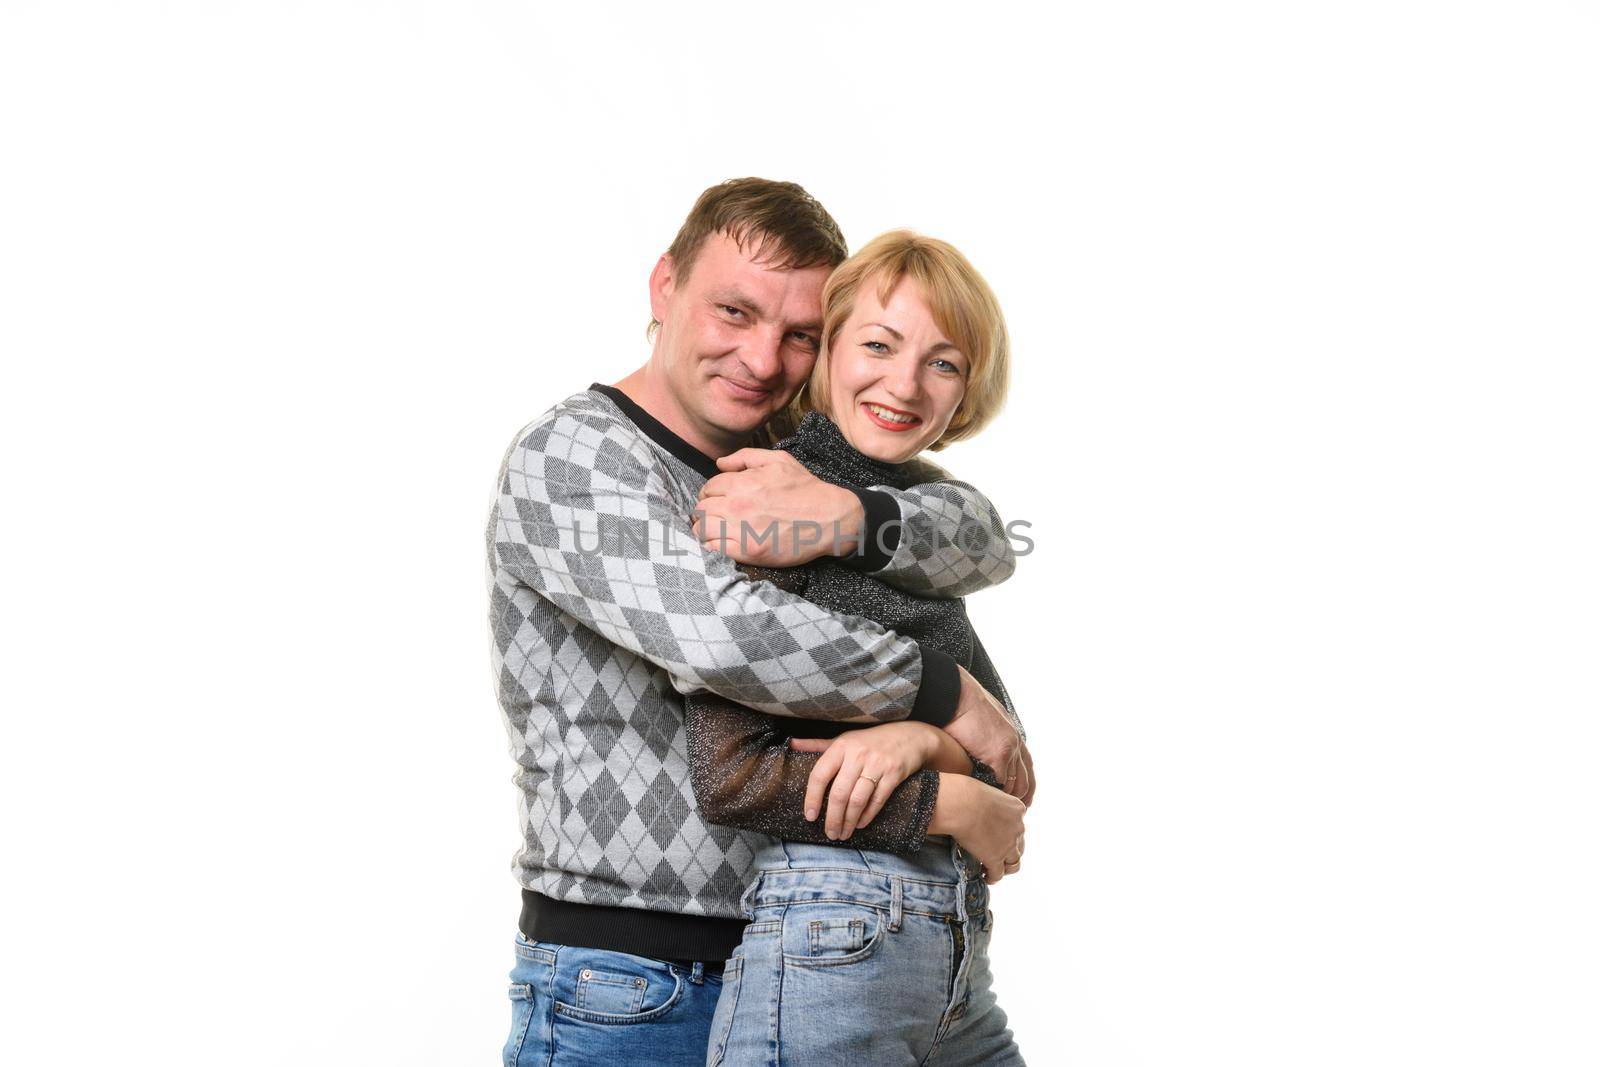 Man hugging woman, isolated on white background